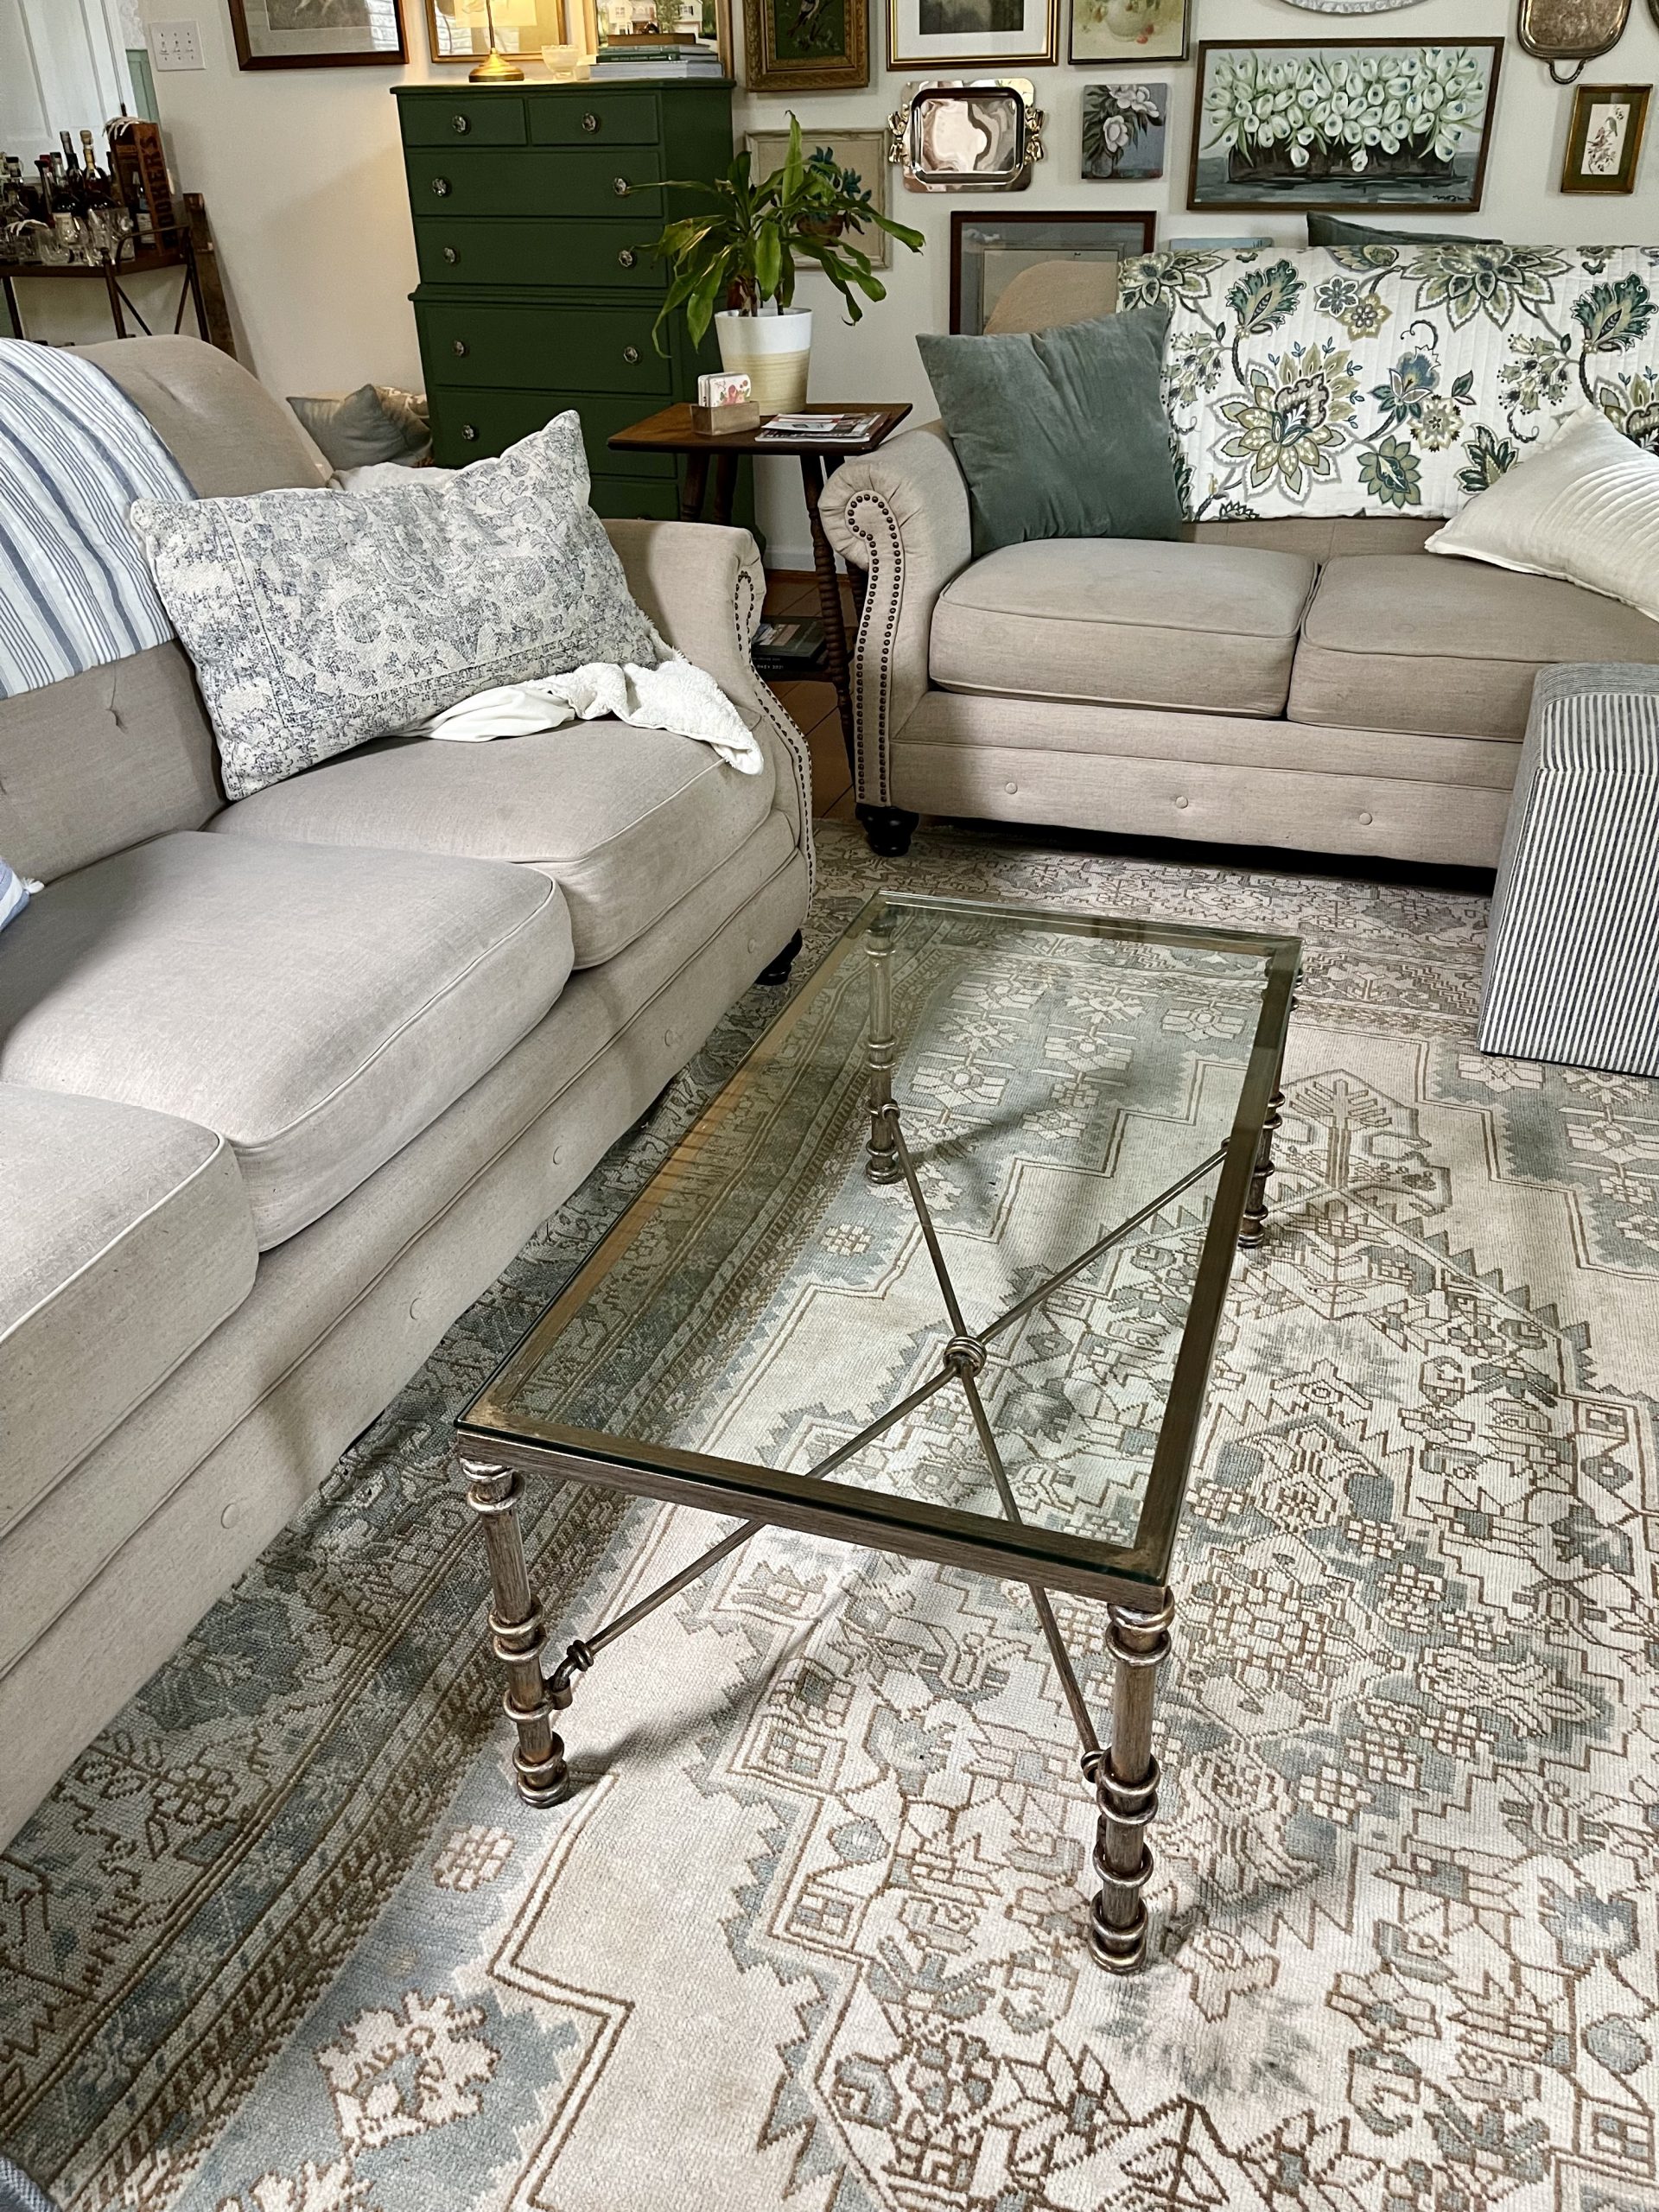 Updating a Glass & Metal Coffee Table with Rub-N-Buff